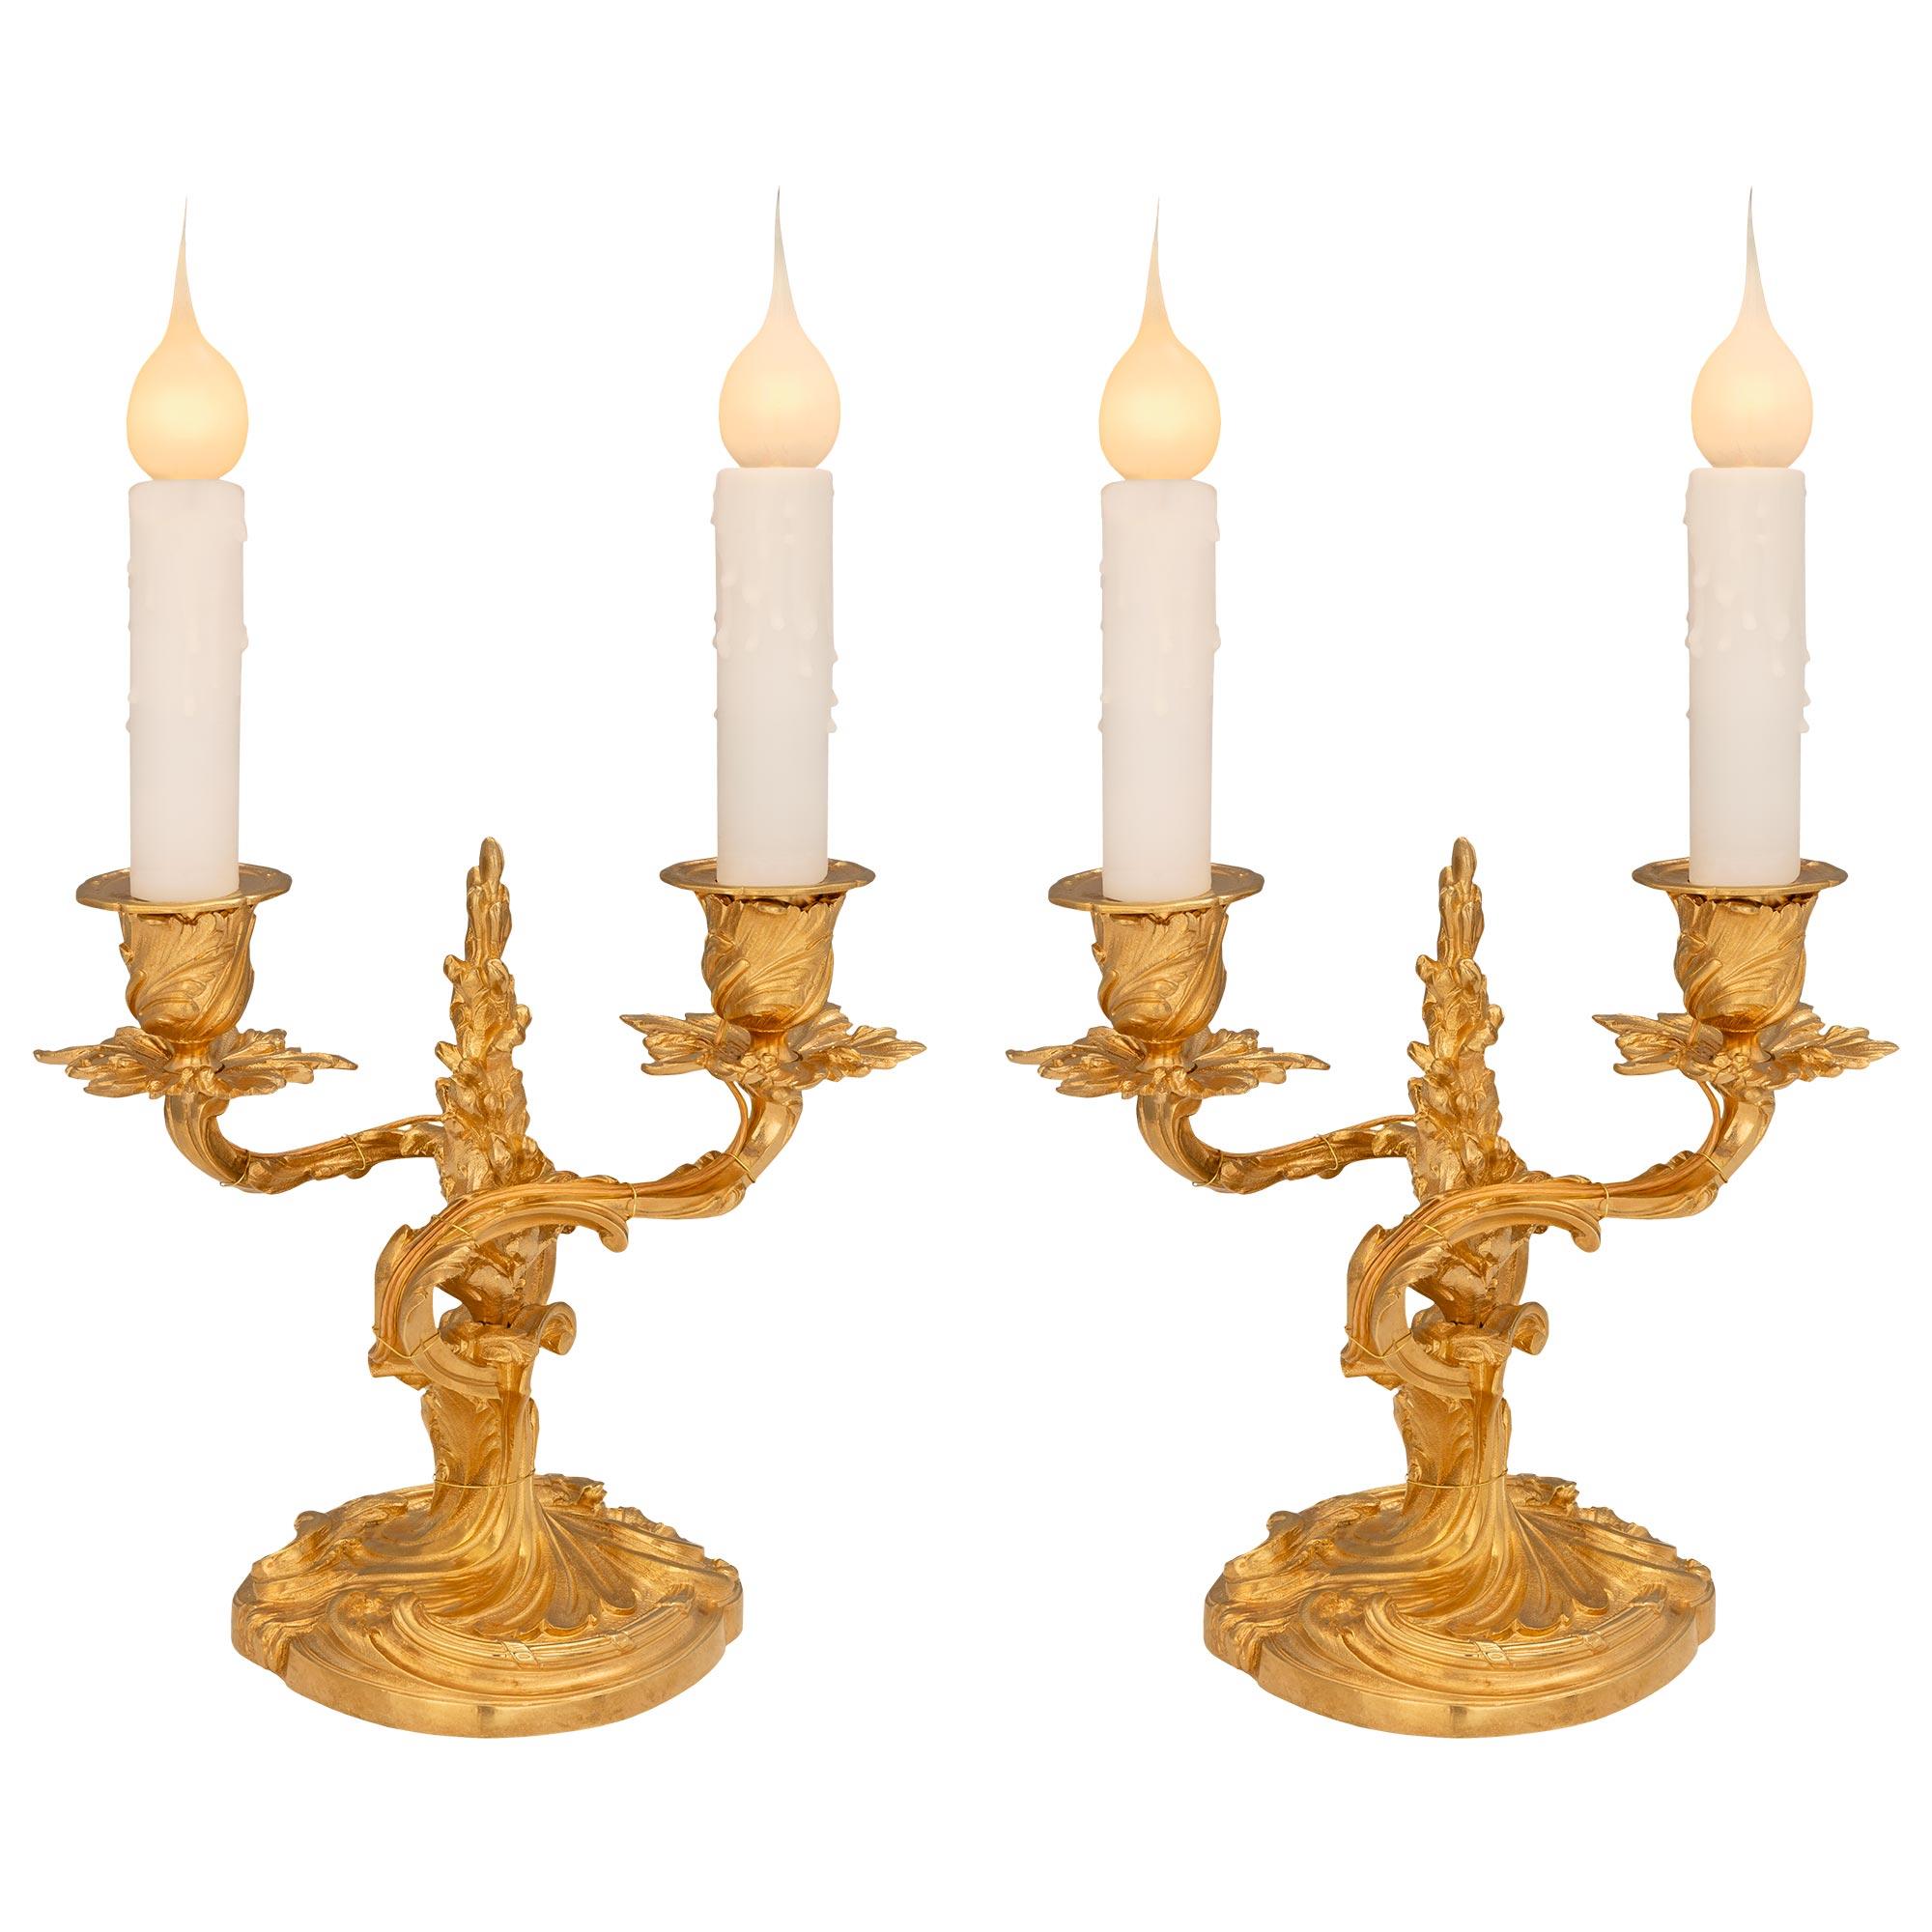 A charming and most elegant pair of French 19th century Louis XV st. ormolu candelabra lamps. Each lamp is raised by a circular foliate base with a beautiful central fut in a striking satin and burnished finish. The two elegantly scrolled arms are